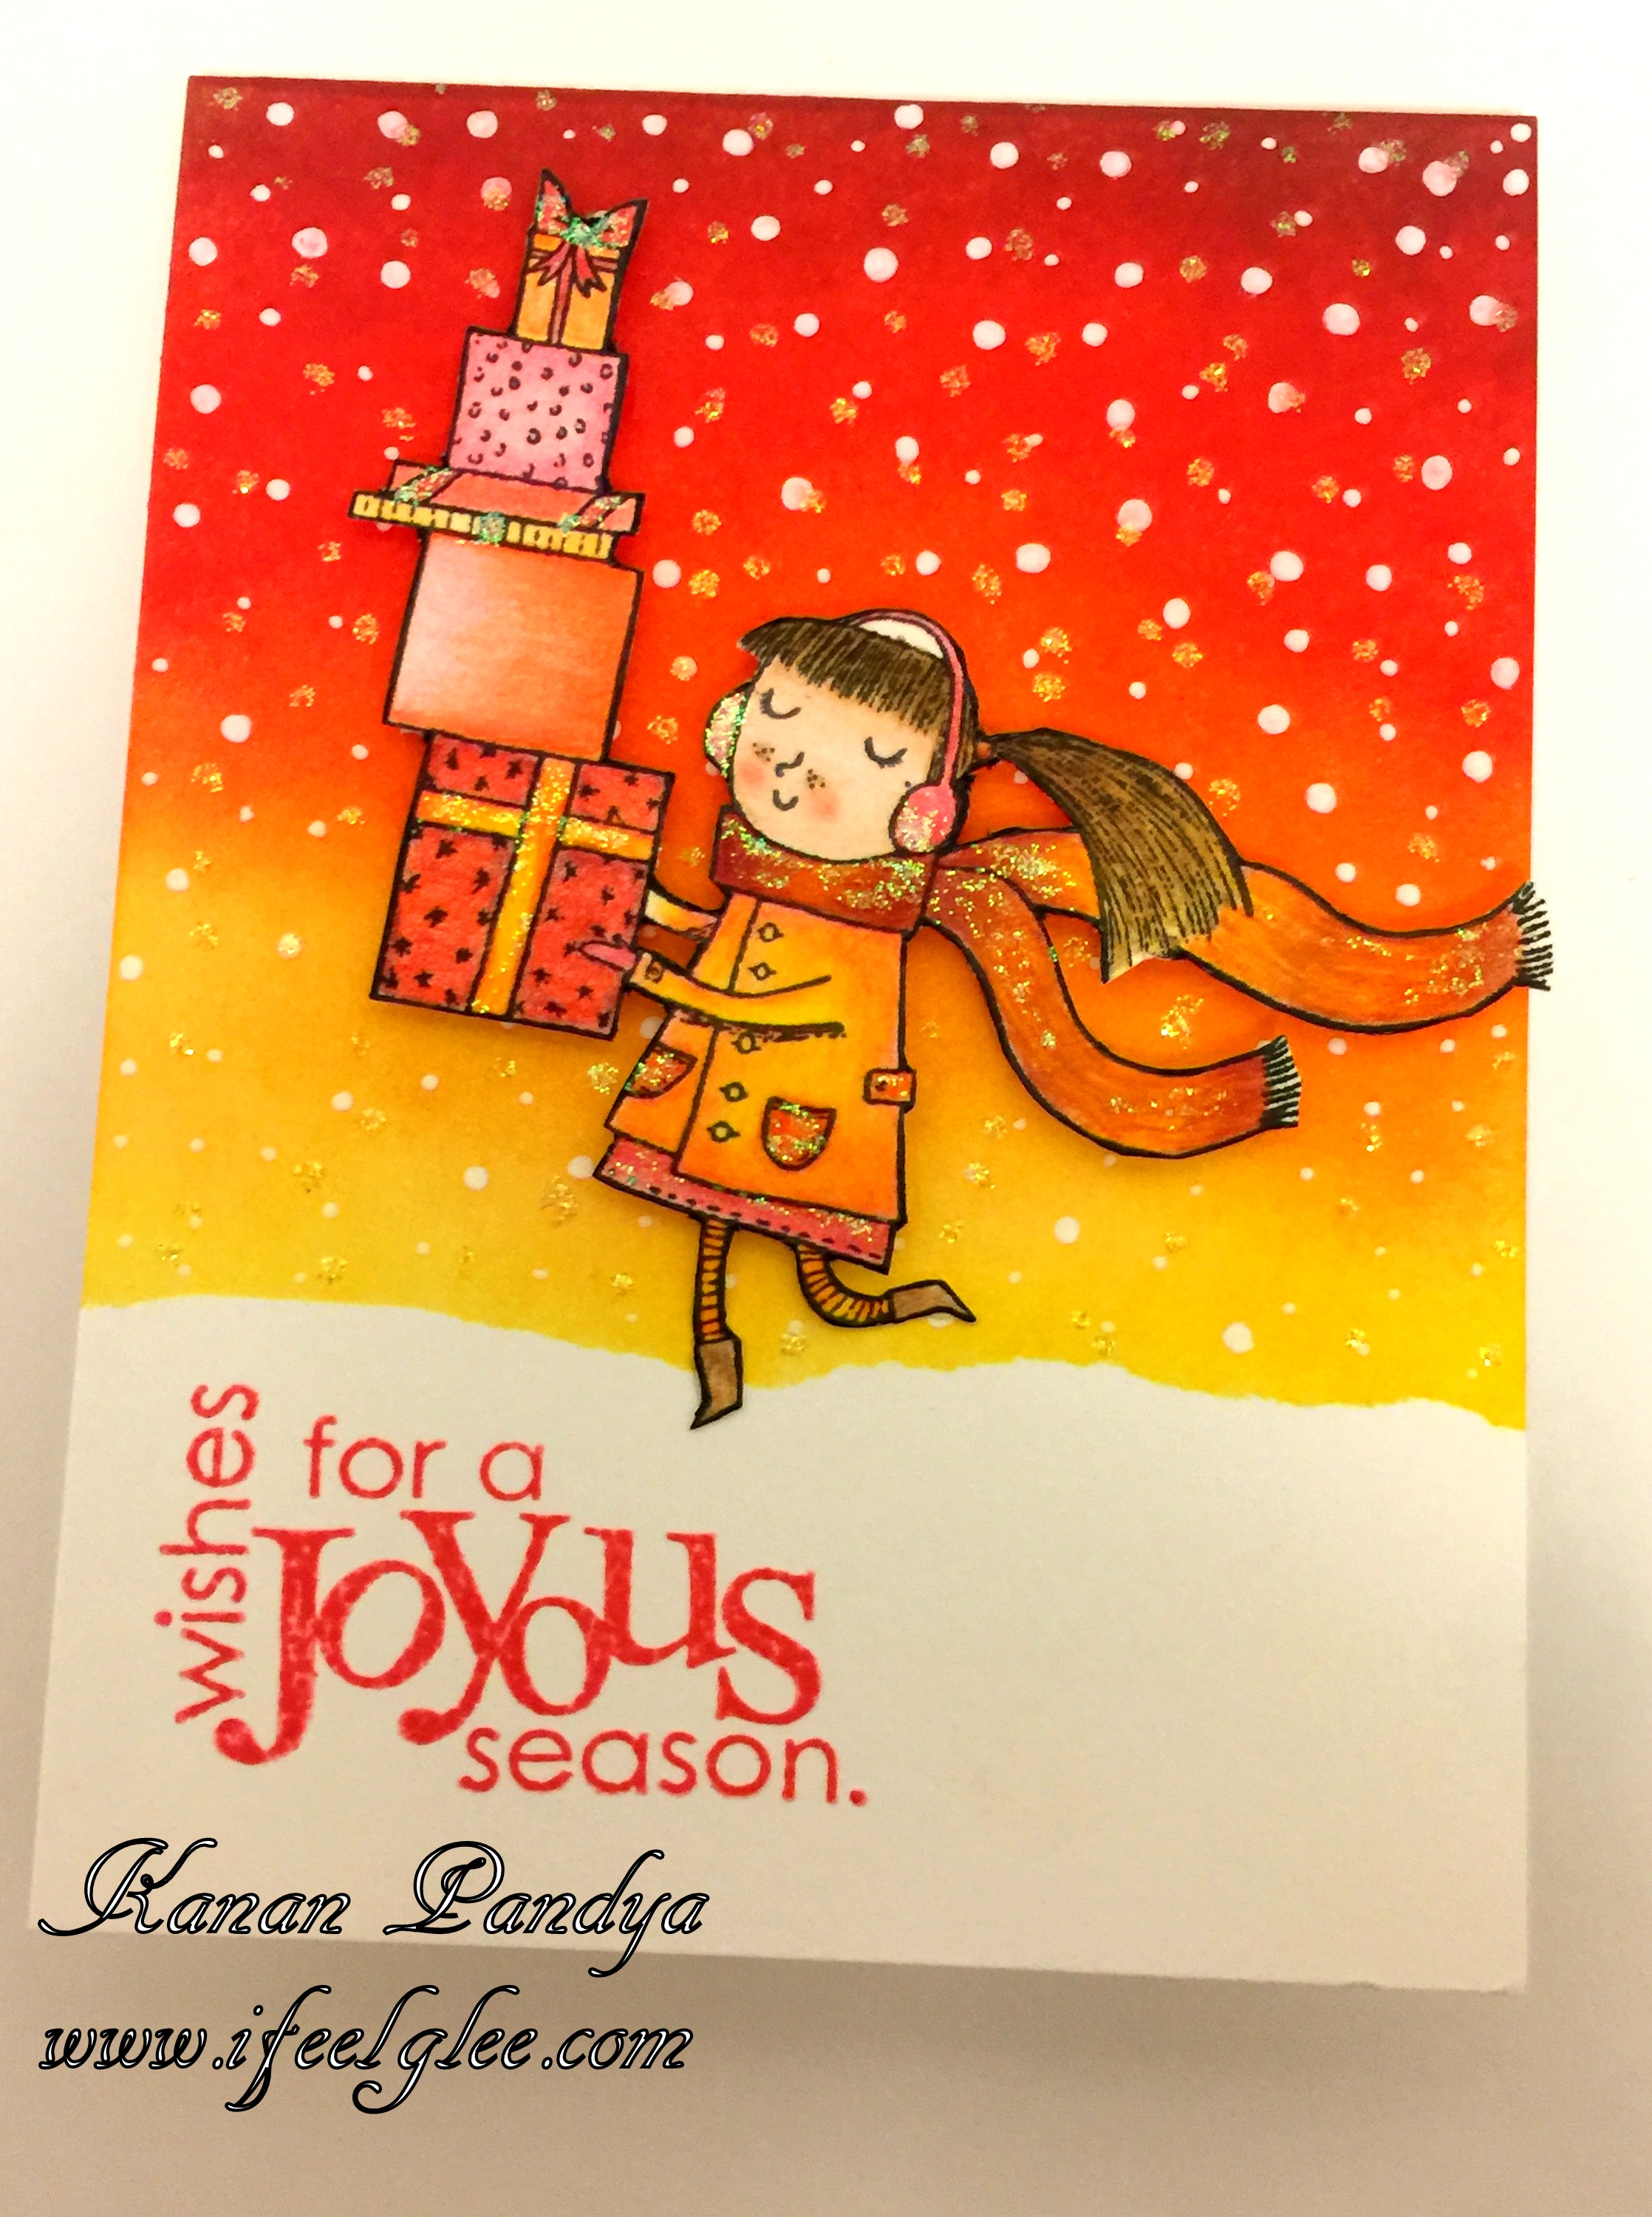 Wishes For A Joyous Season. ﻿